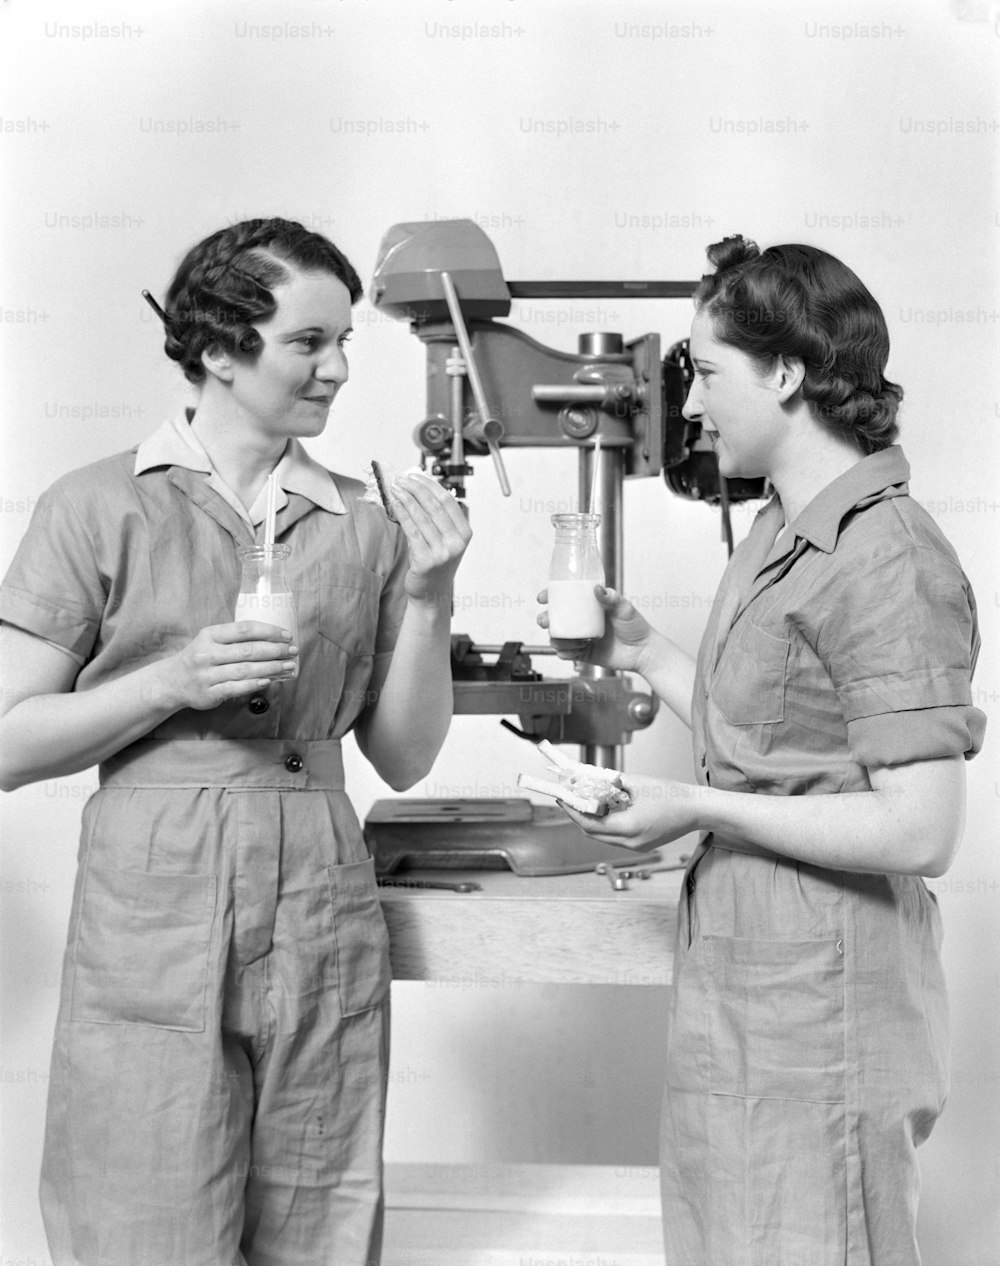 UNITED STATES - CIRCA 1940s:  Two women workers standing near drill press, eating sandwich and drinking milk.